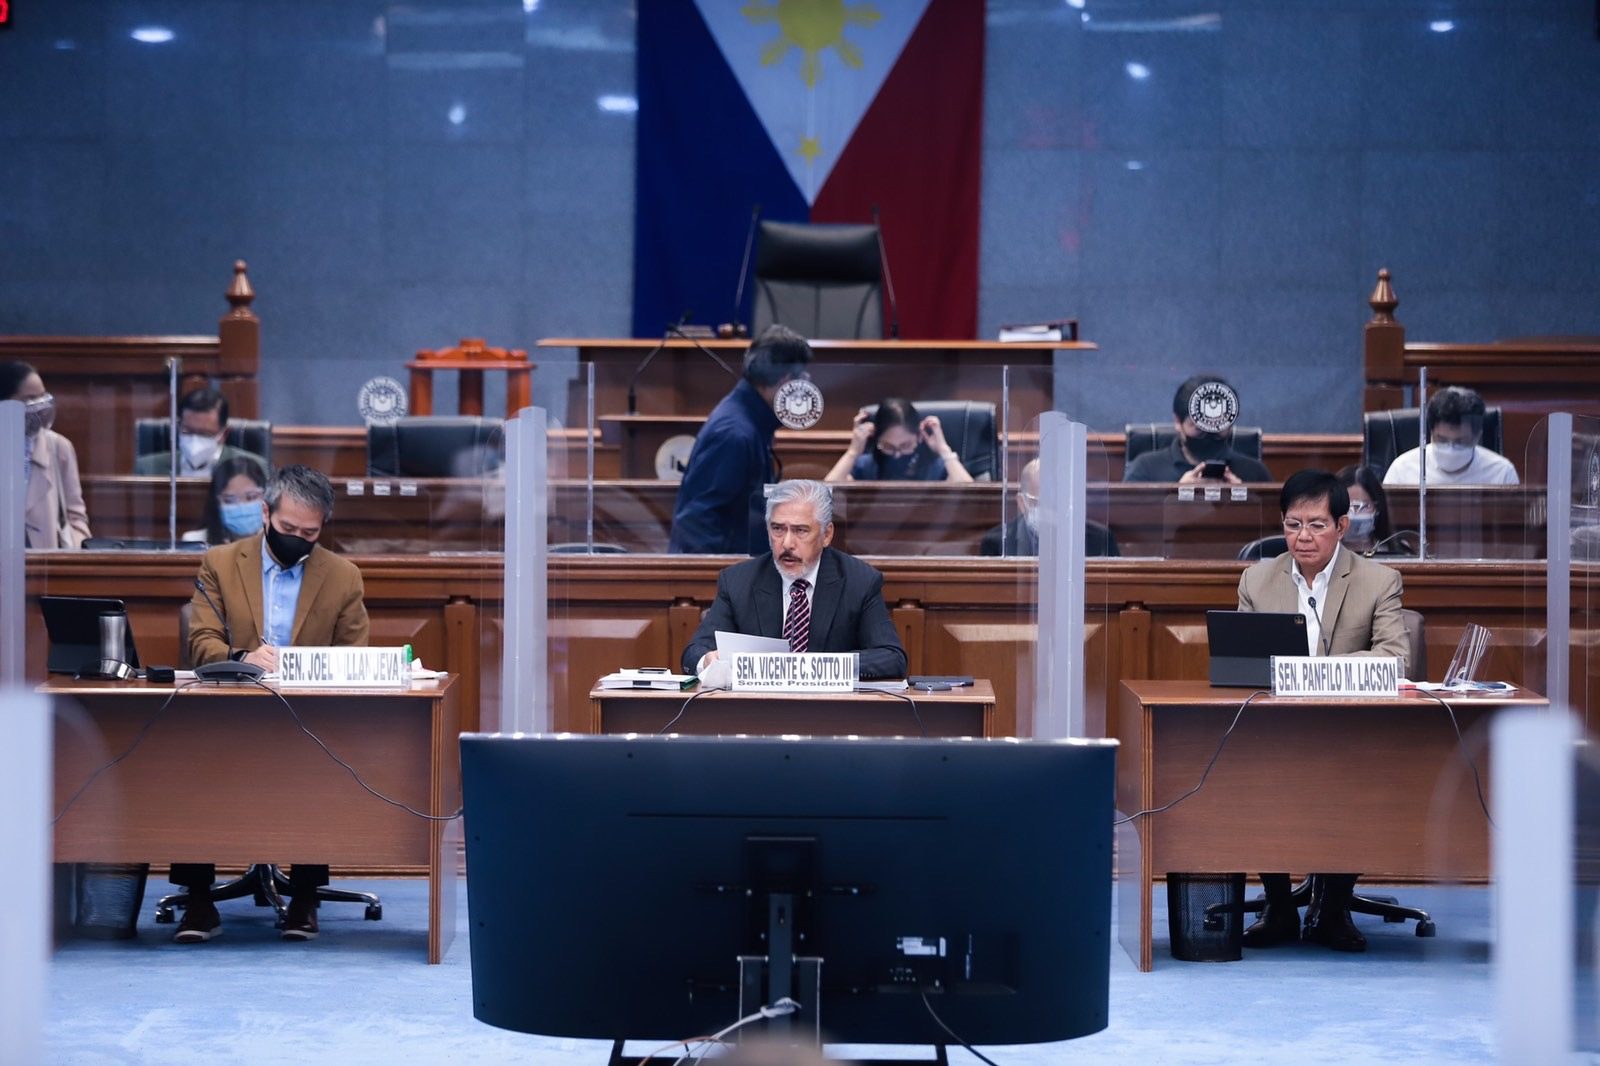 Bills easing restrictions on foreign investors among Senate’s priorities